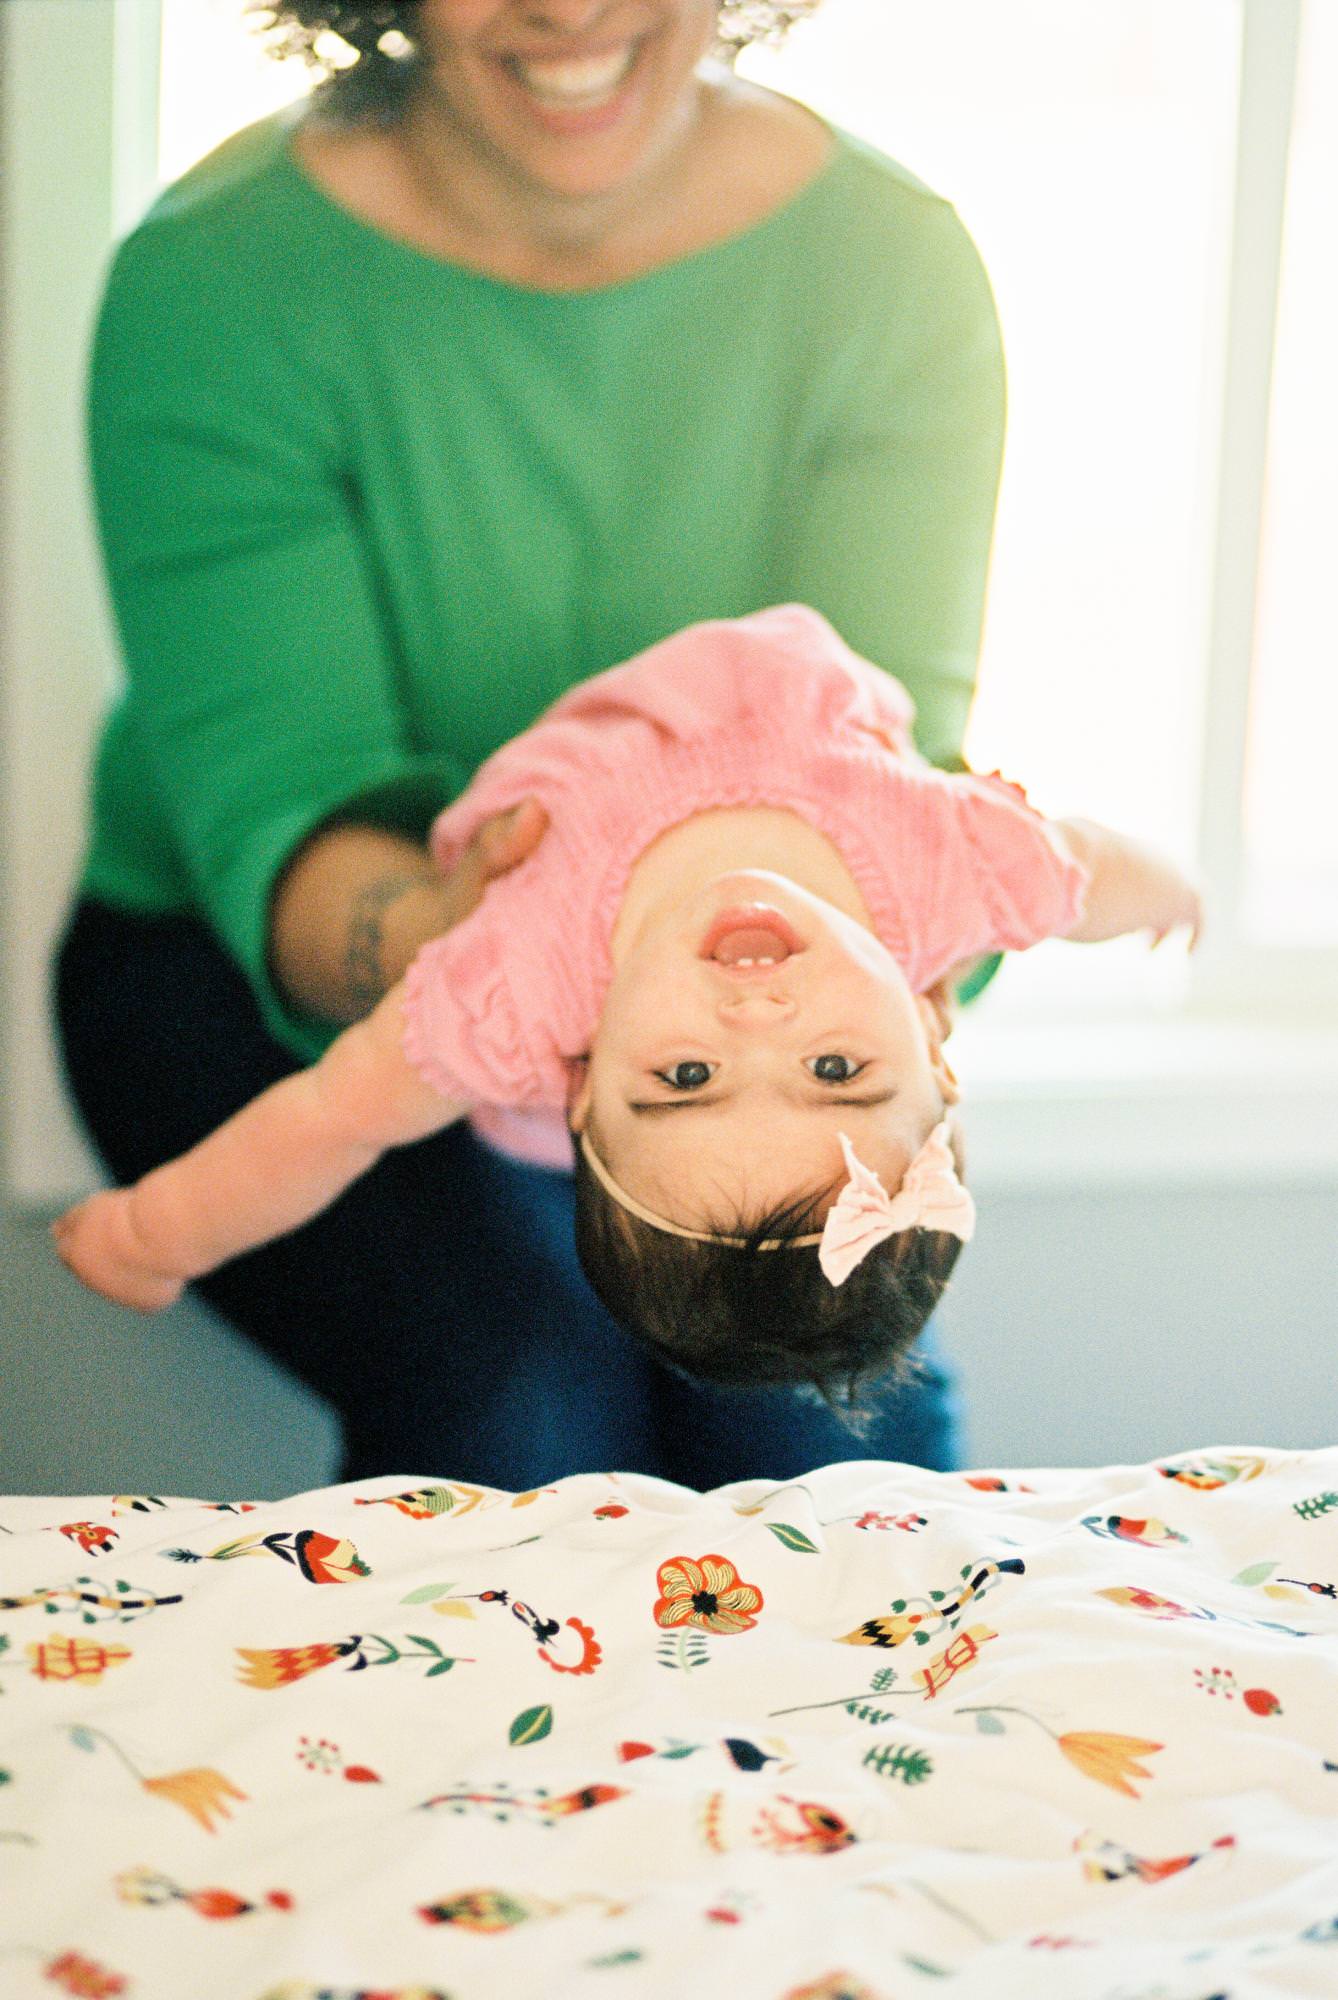 A mom holds her baby upsidedown